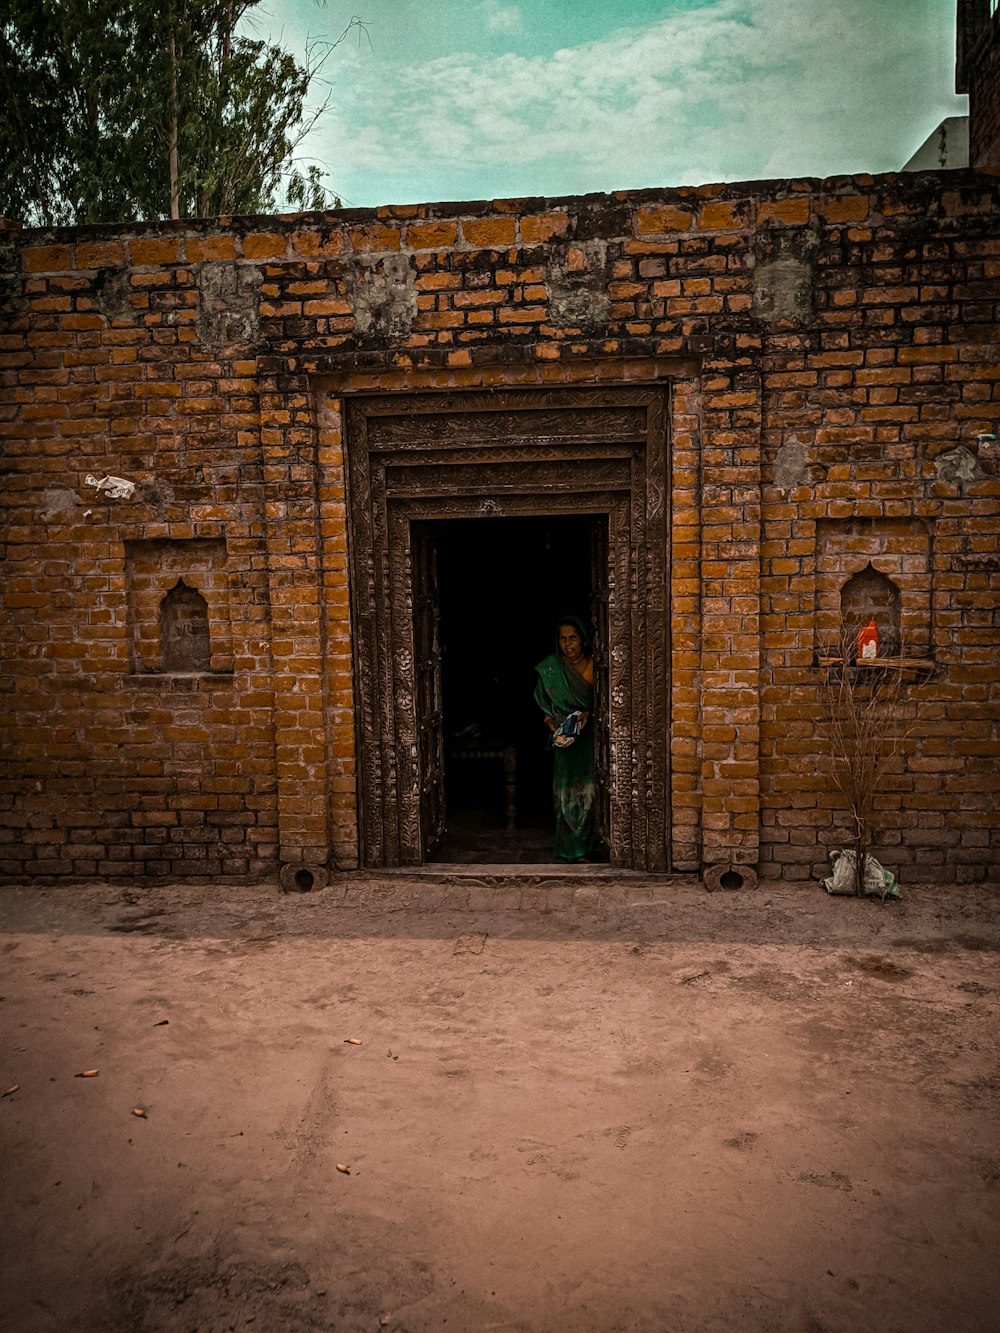 a person standing in a doorway of a brick building